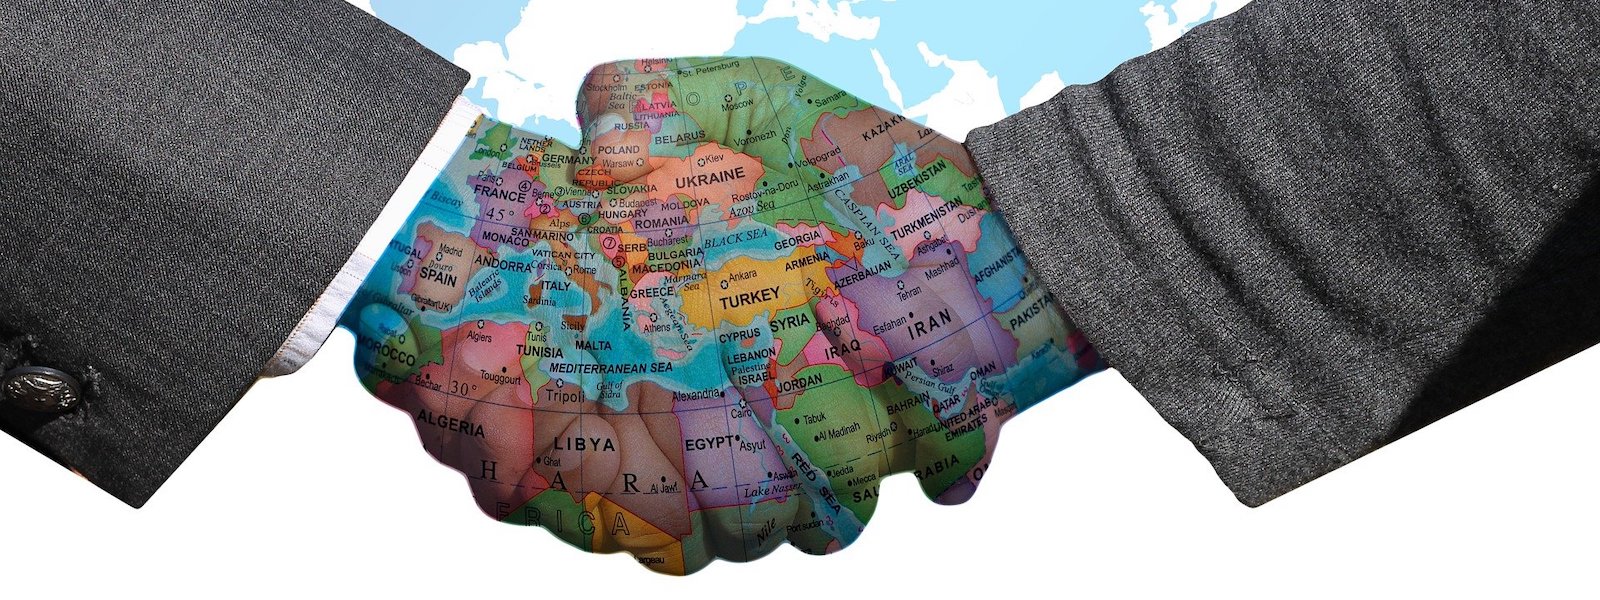 Handshake imposed over world map, imposed over blue sky. Image by Gerd Altmanm from Pixabay. 